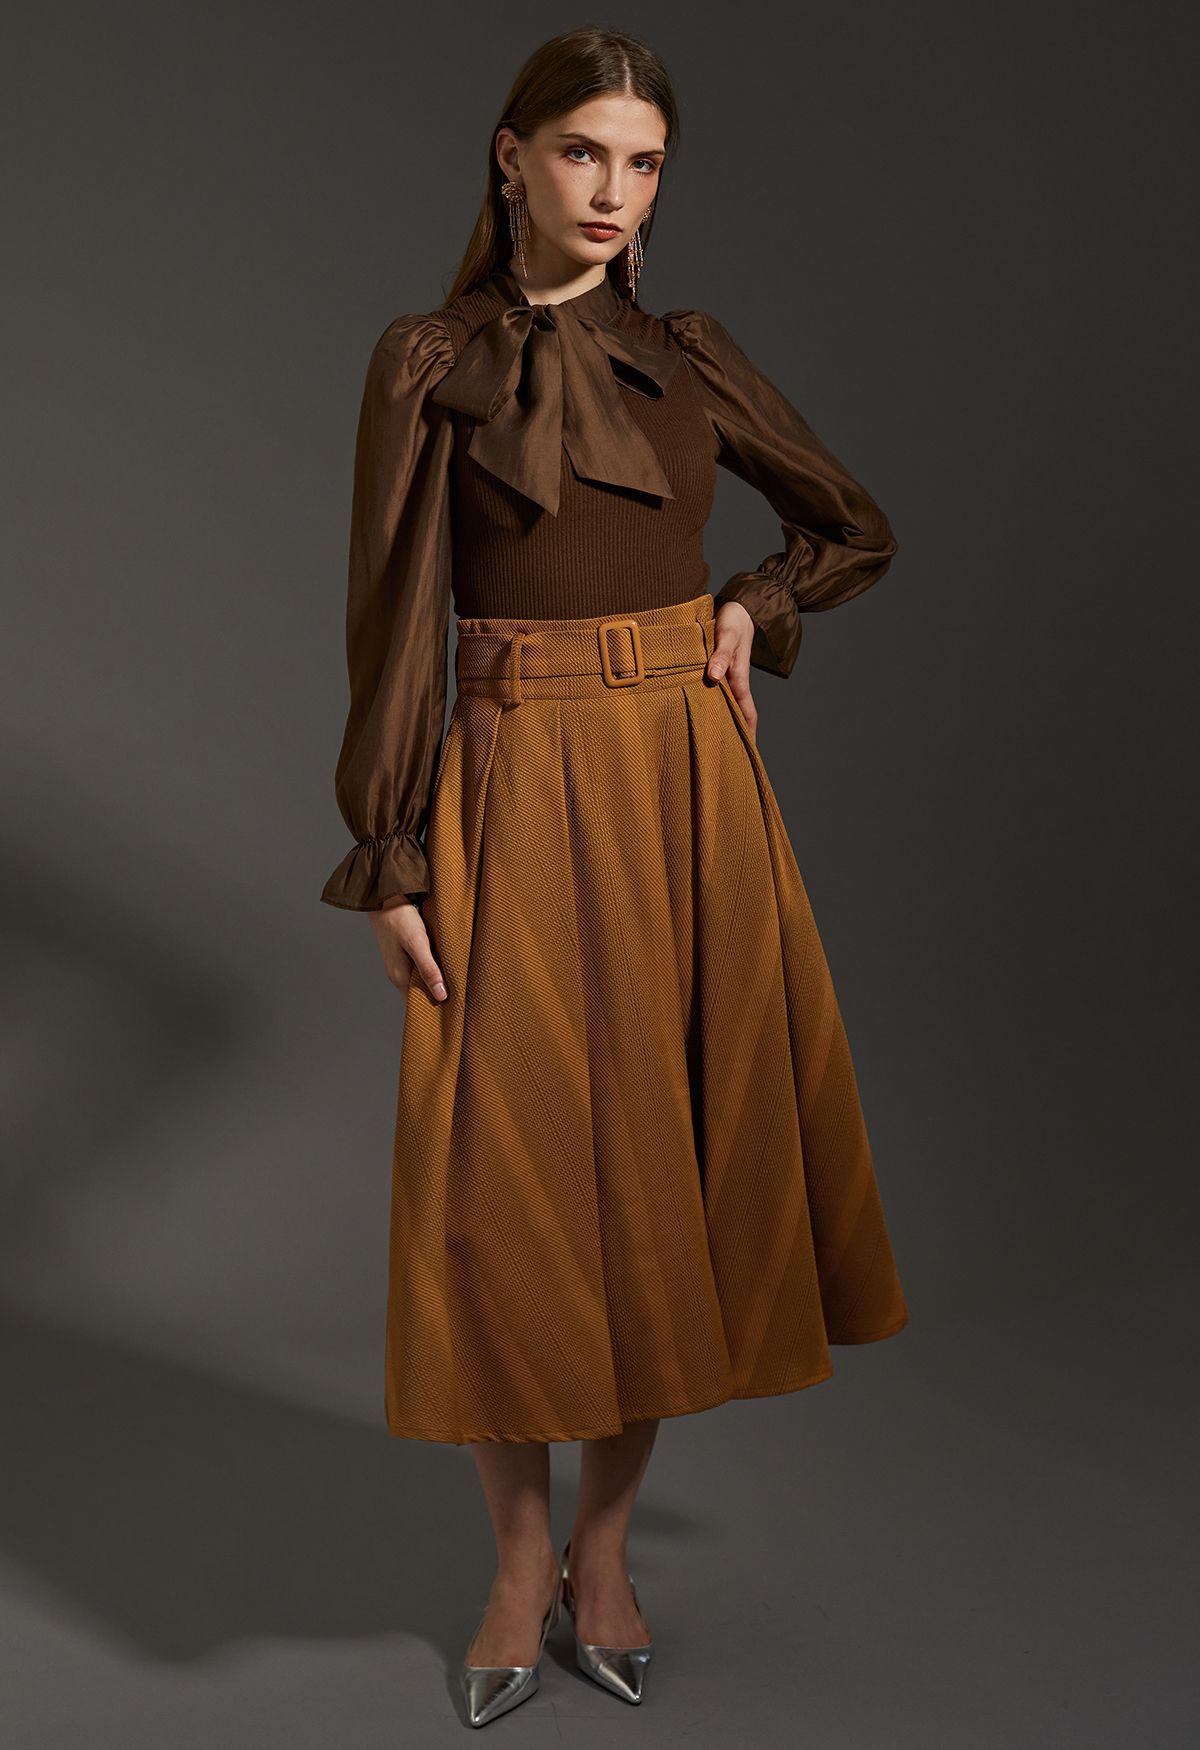 Detachable Bowknot Spliced Knit Top in Brown